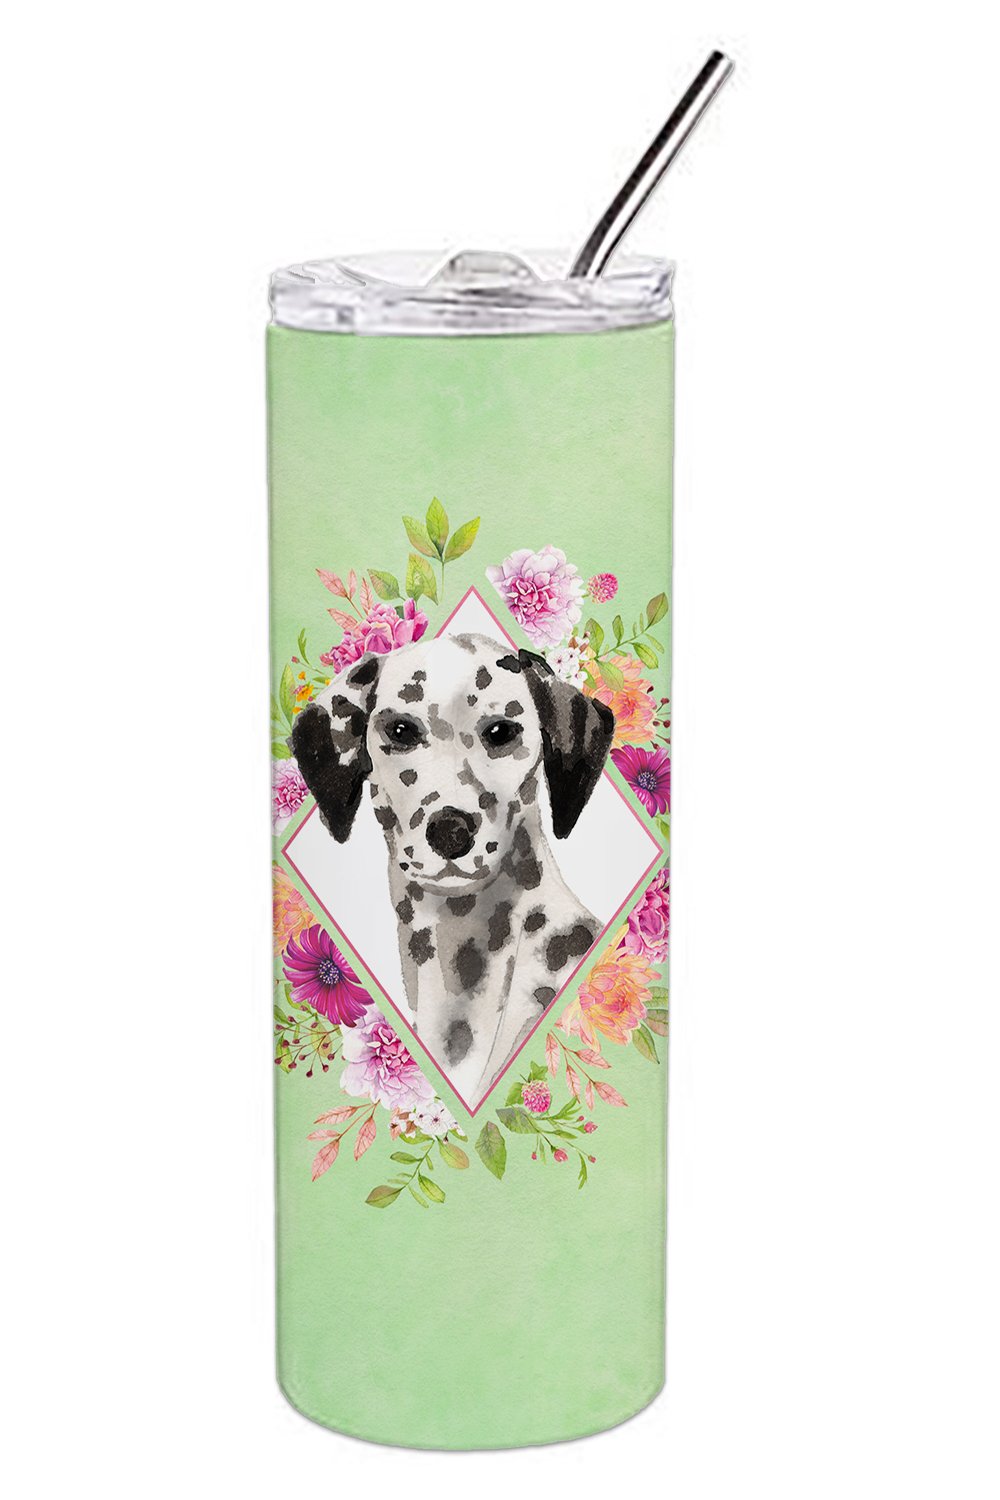 Dalmatian Green Flowers Double Walled Stainless Steel 20 oz Skinny Tumbler CK4402TBL20 by Caroline's Treasures